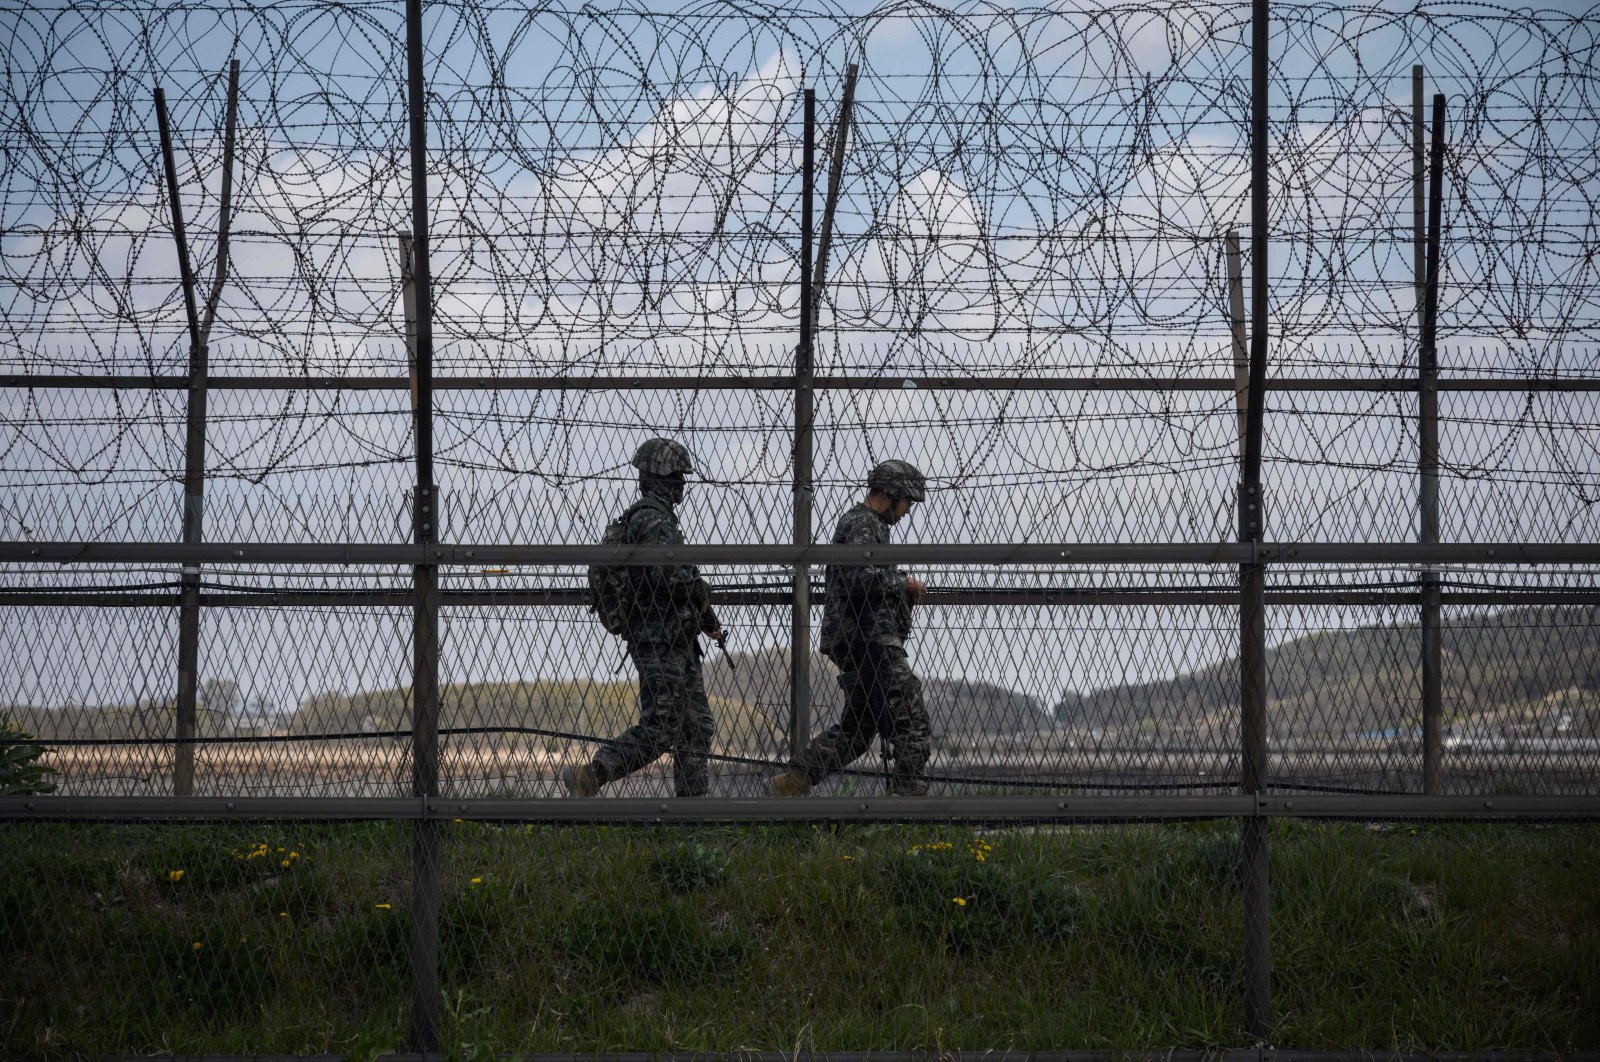 South Korean soldiers patrolling along a barbed wire fence Demilitarized Zone (DMZ) separating North and South Korea, on the South Korean island of Ganghwa, April 23, 2020. (AFP Photo)